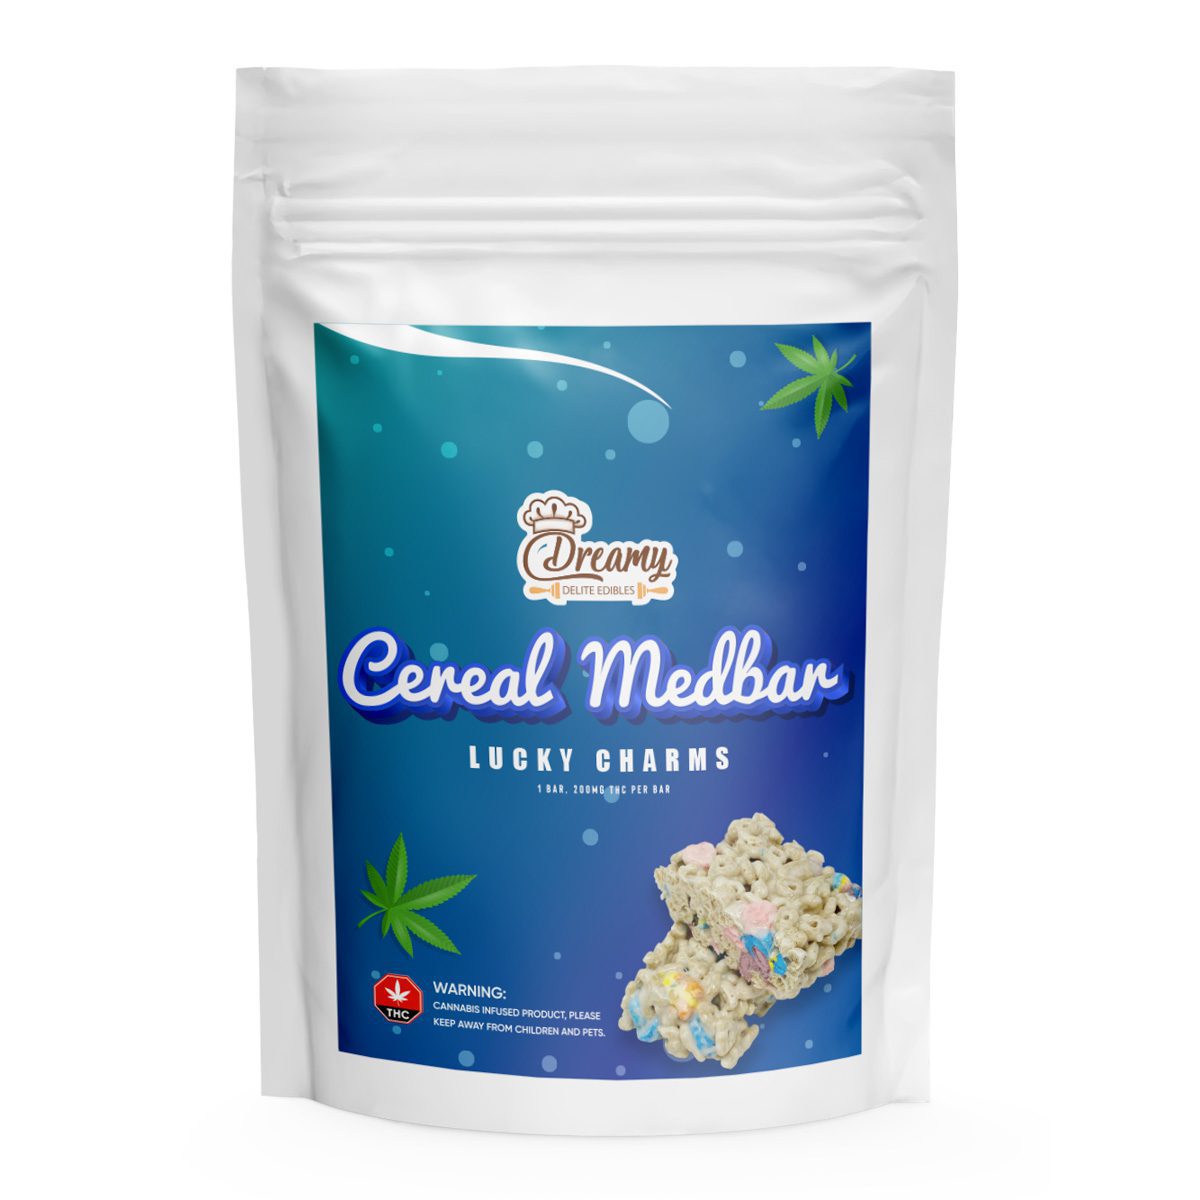 Lucky Charms Cereal Medbar 200MG THC By Dreamy Delite Edibles